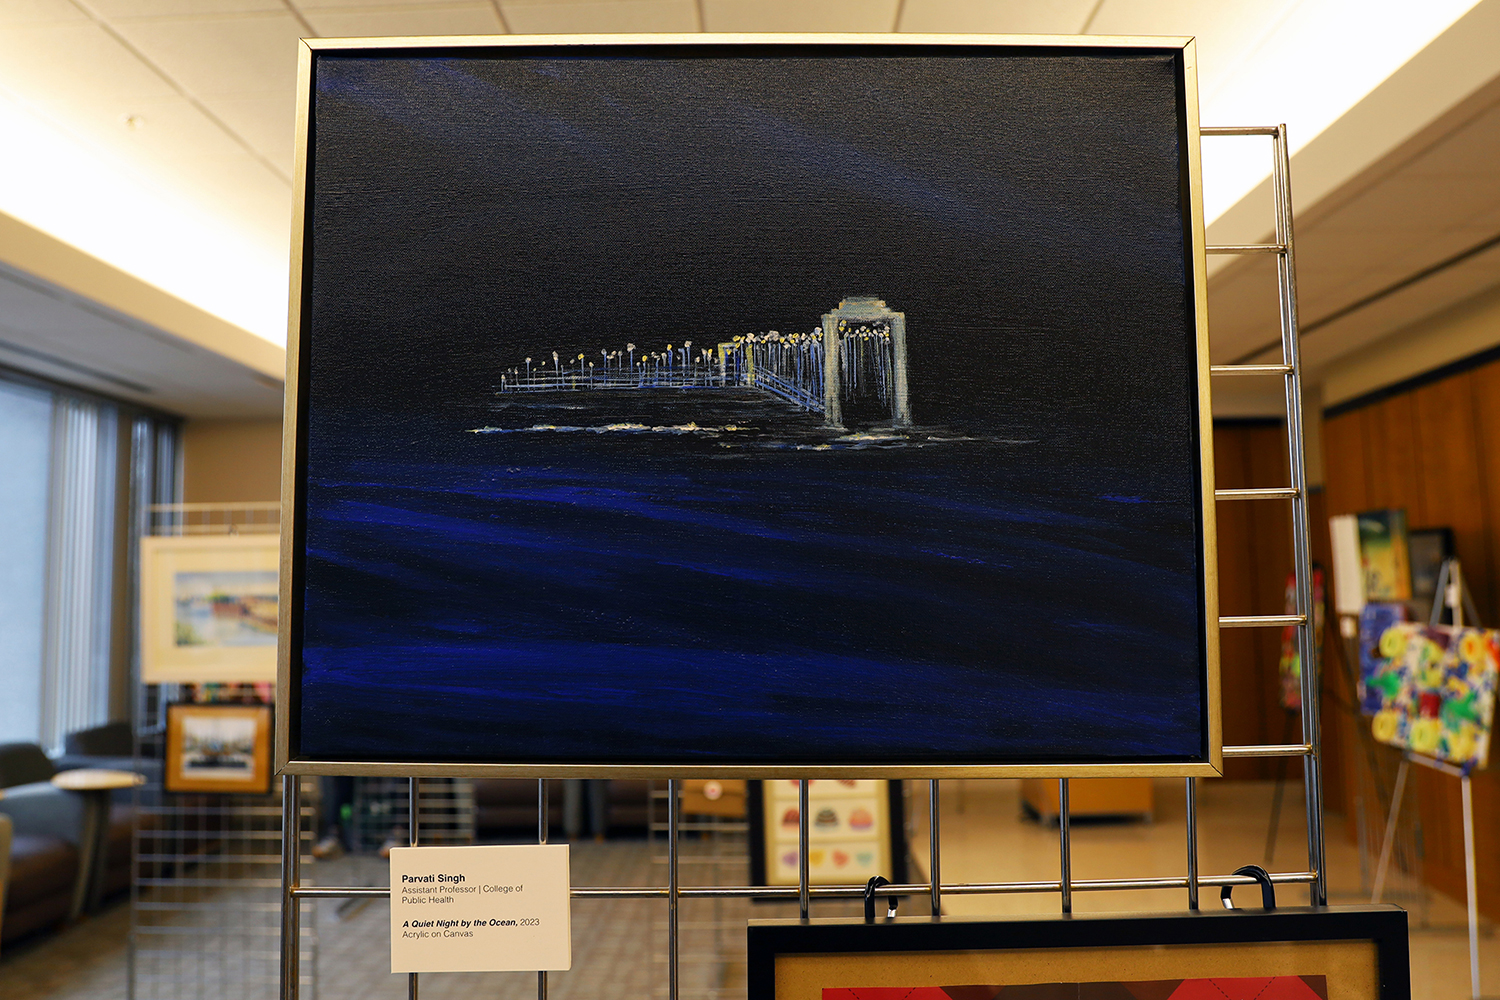 Singh’s painting “A Quiet Night by the Ocean”